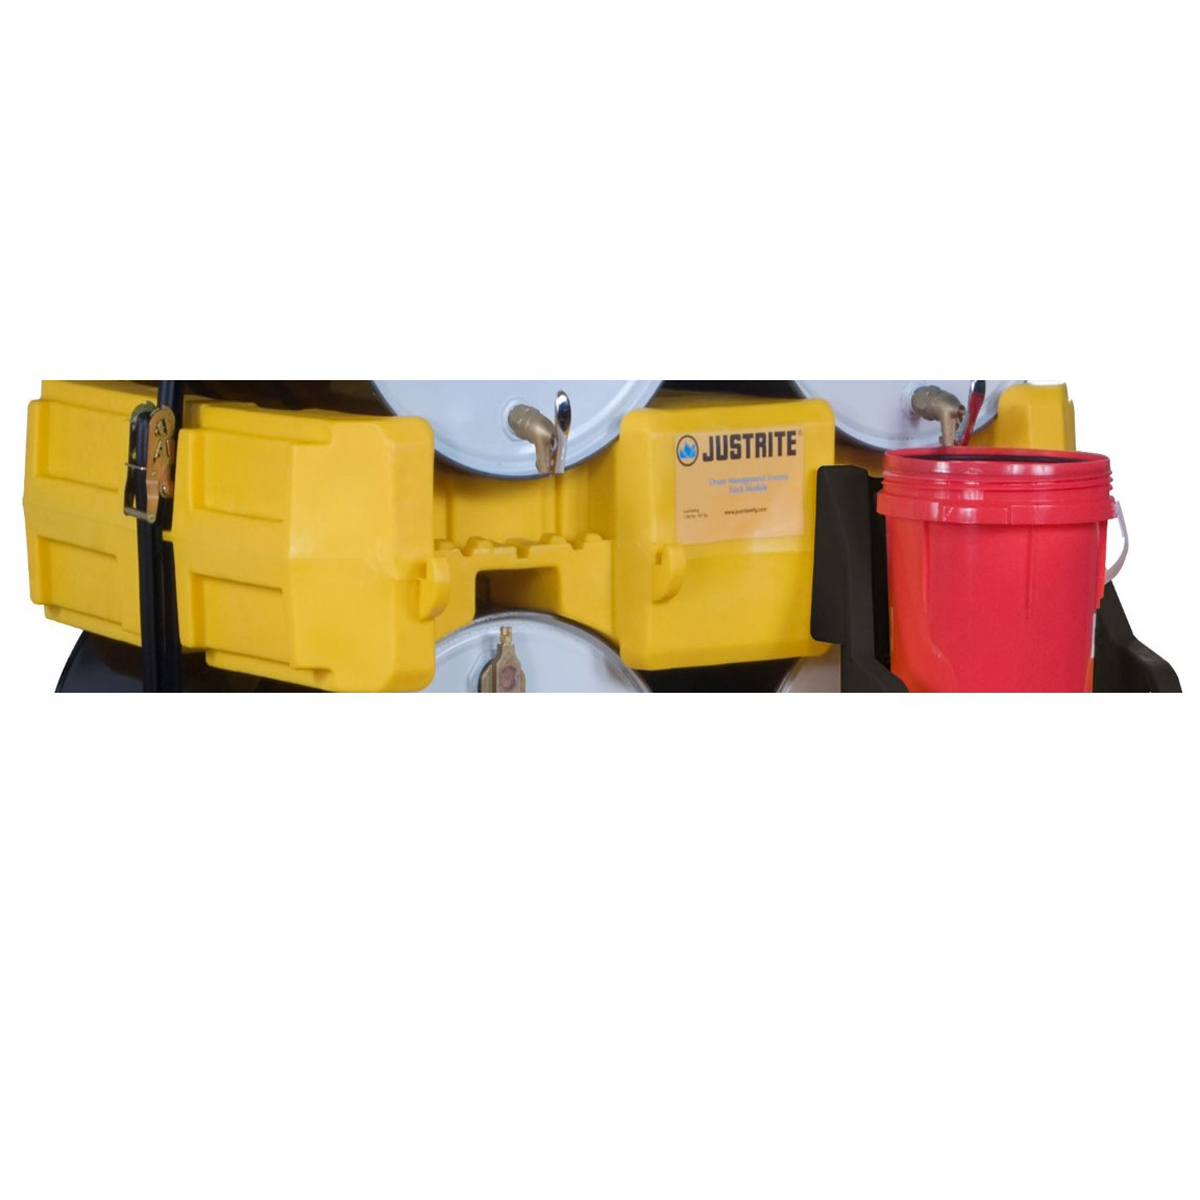 Justrite™ 66 Gallon Yellow Polyethylene Stack Module With Nylon Strapping (For EcoPolyBlend™ Drum Management System)